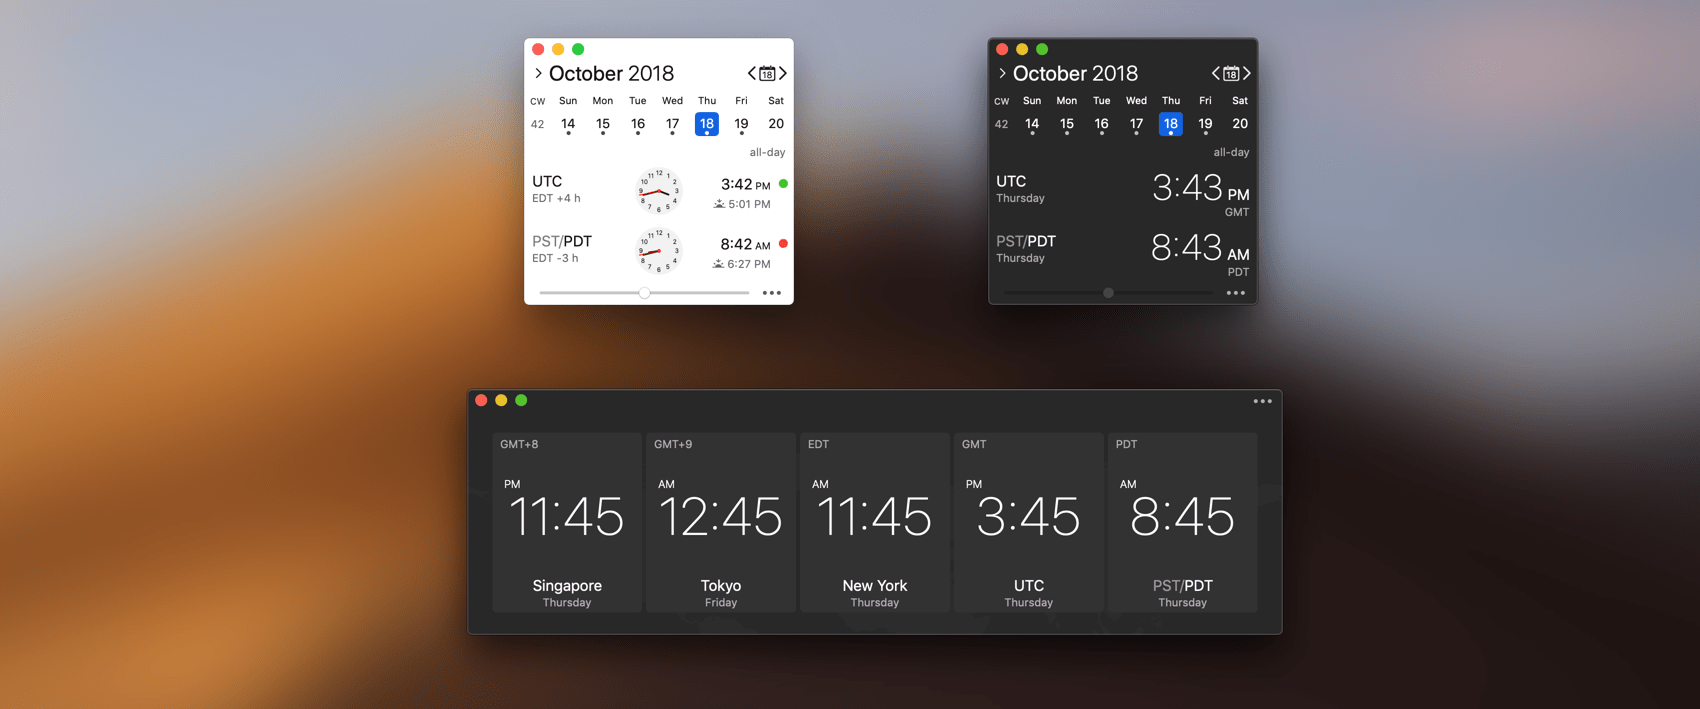 free world clock download for mac